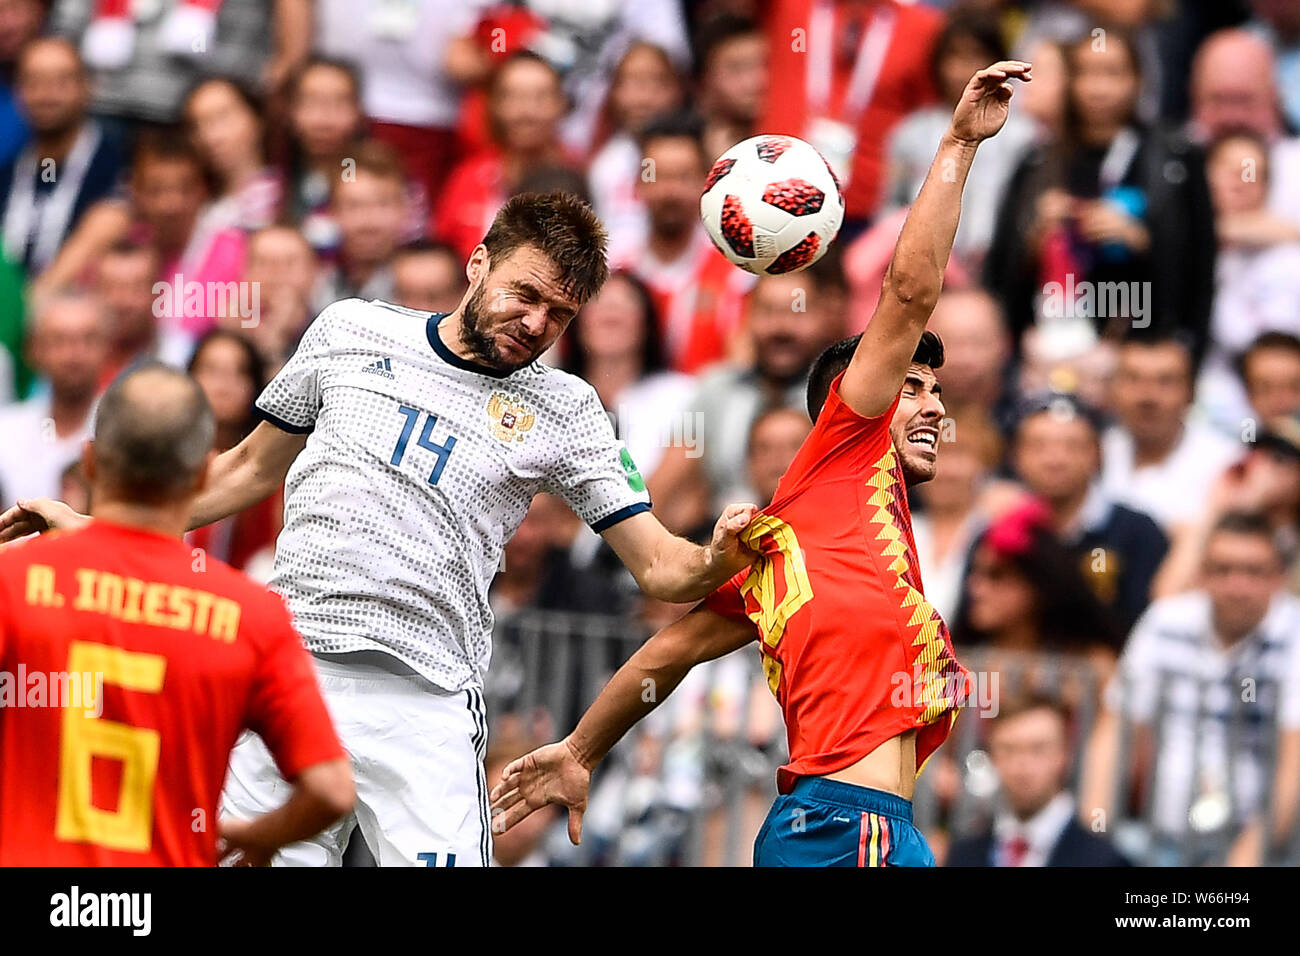 Vladimir Granat of Russia, left, heads the ball against a player of Spain in their Round of 16 match during the 2018 FIFA World Cup in Moscow, Russia, Stock Photo